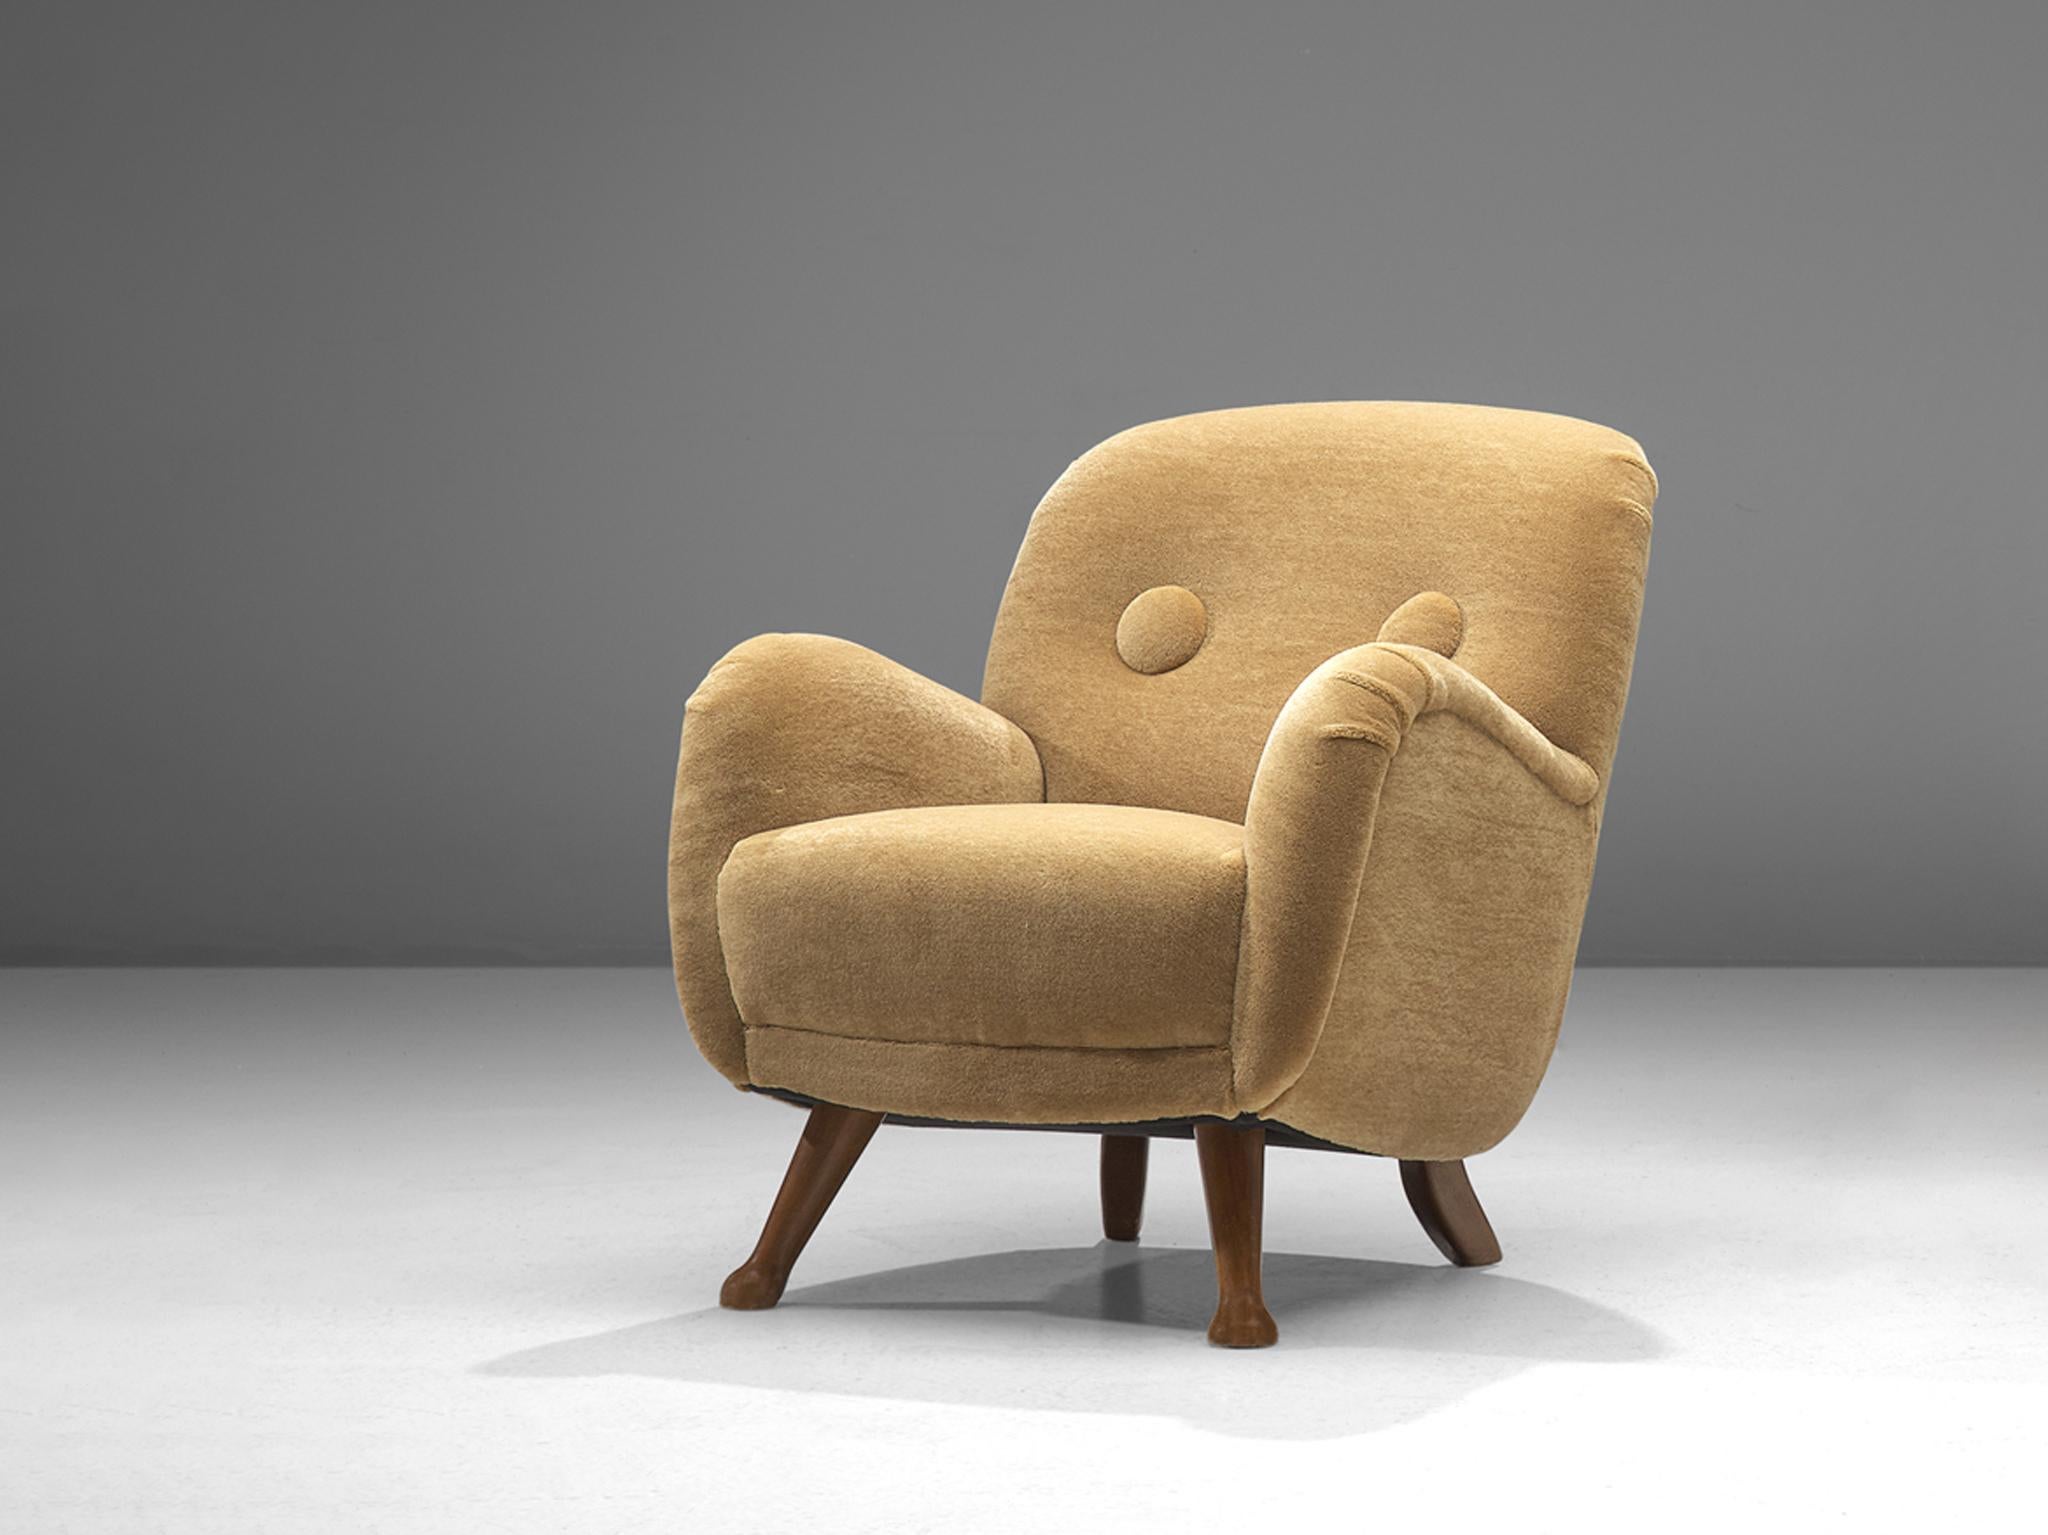 Berga Mobler, armchair, beige teddy fabric, beech, Denmark, 1940s.

This bold and curvy armchair is based on a solid construction with a tender touch due to the soft texture of the teddy fabric. The whole shell is slightly tilted backwards. The